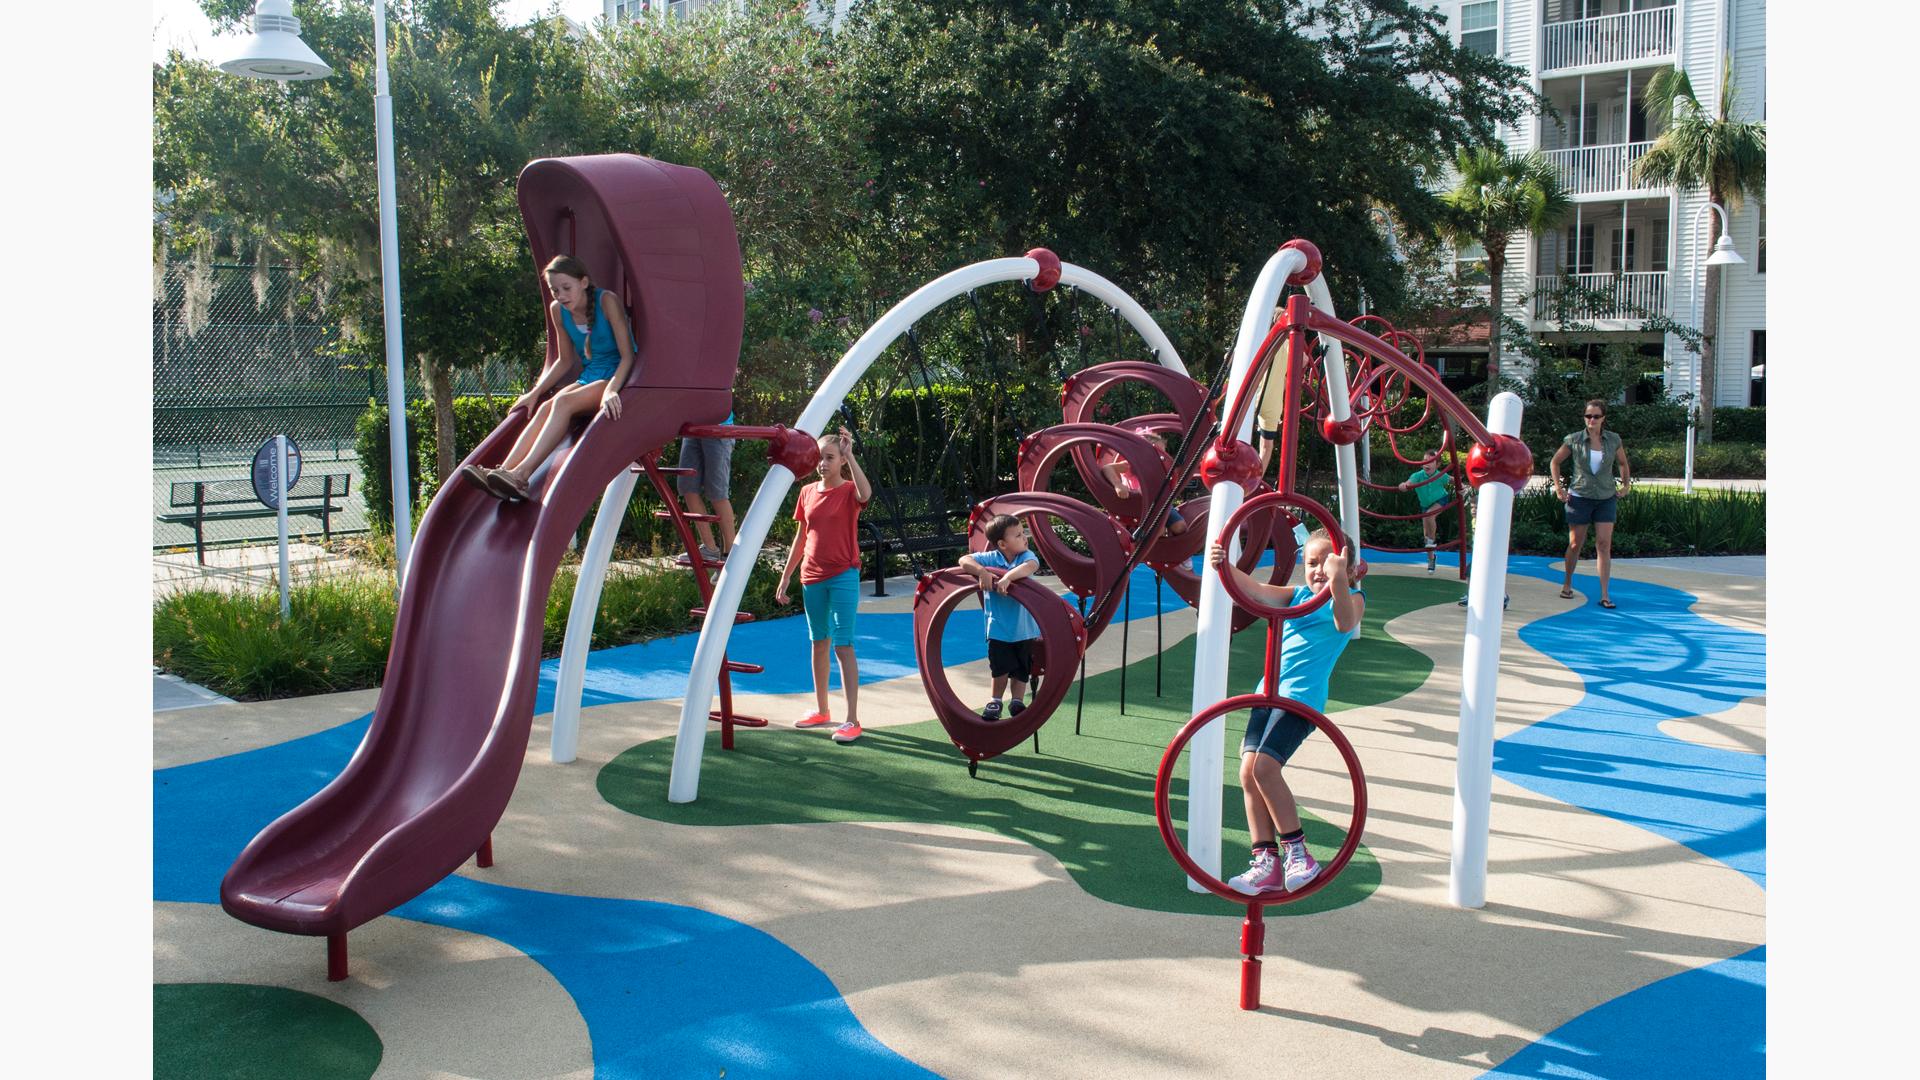 A manufactured surface on the ground. A girls rides down the Evos slide. Other kids play on the other parts of the structures as an adult looks on. 